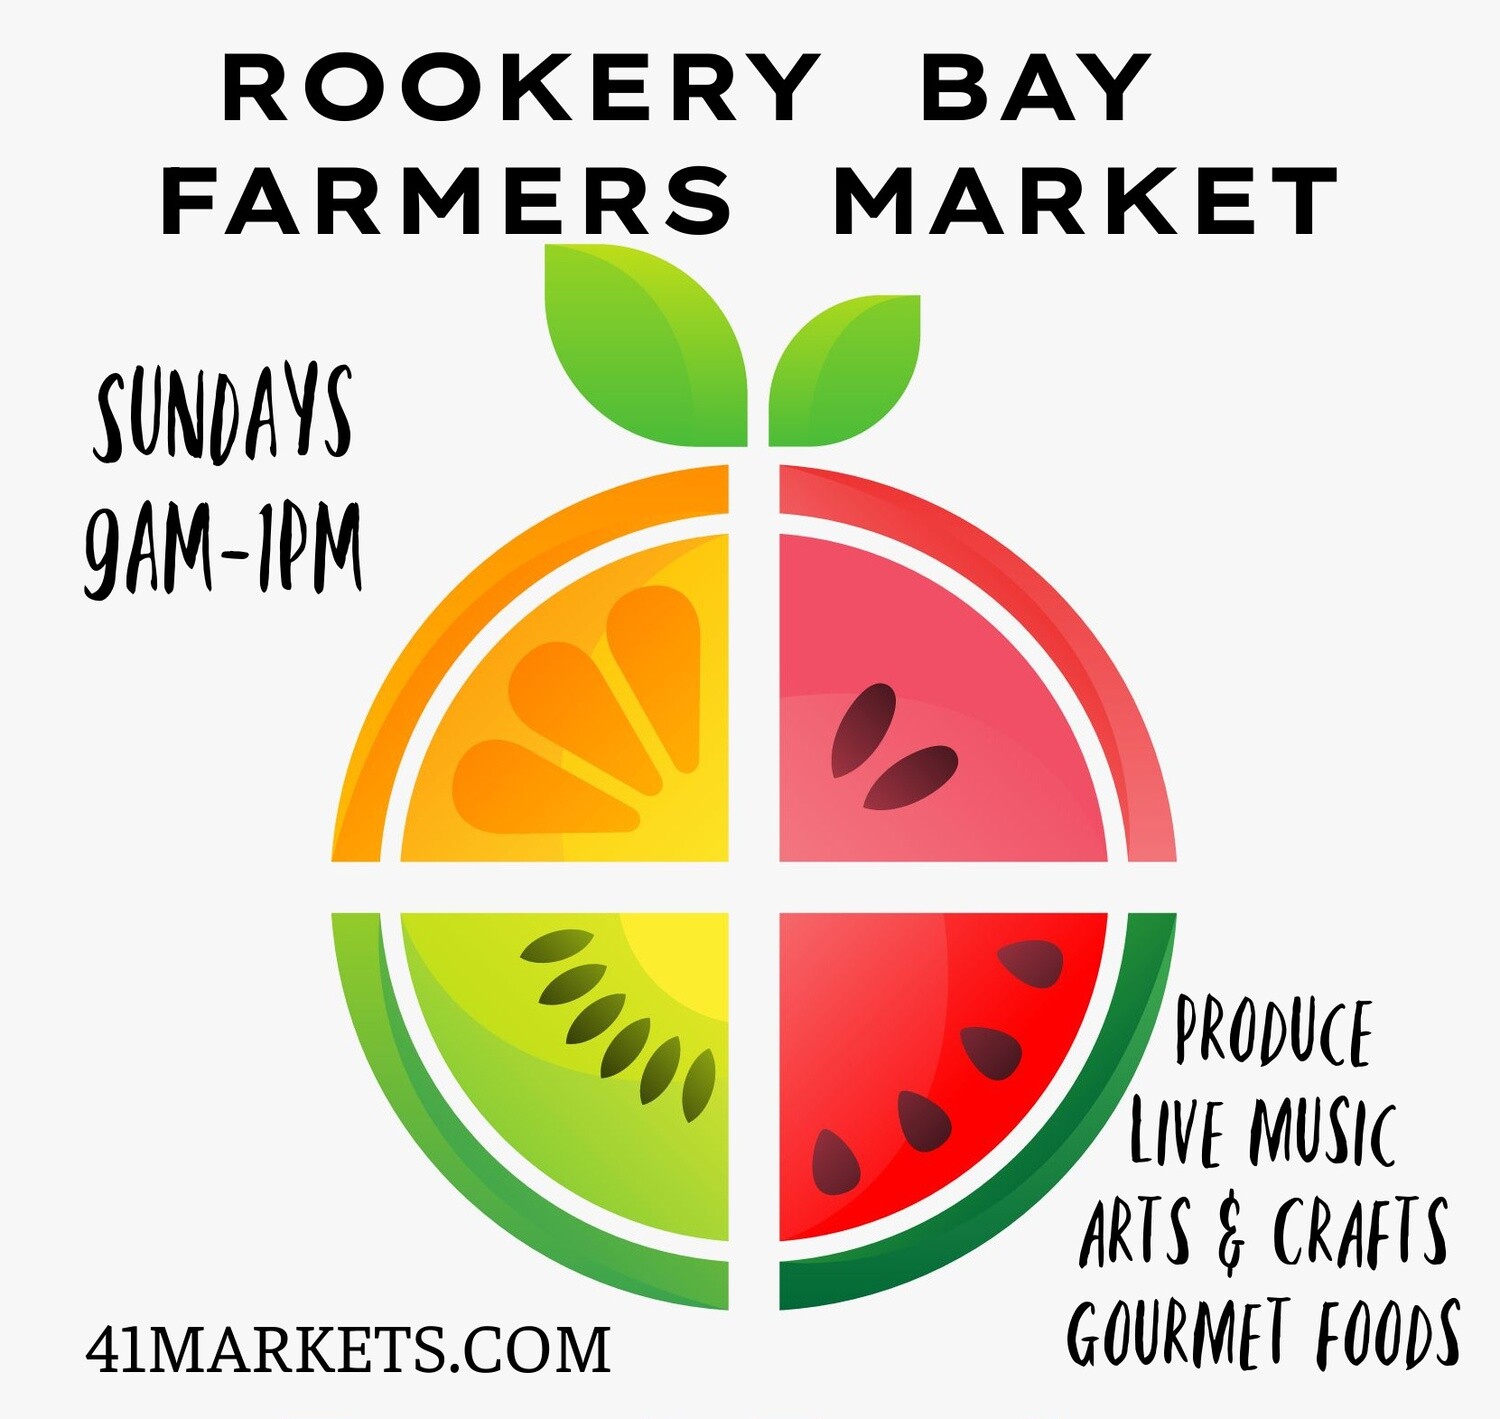 5-Sunday Market at Rookery Bay April (4weeks Closed Easter). Pay after acceptance.